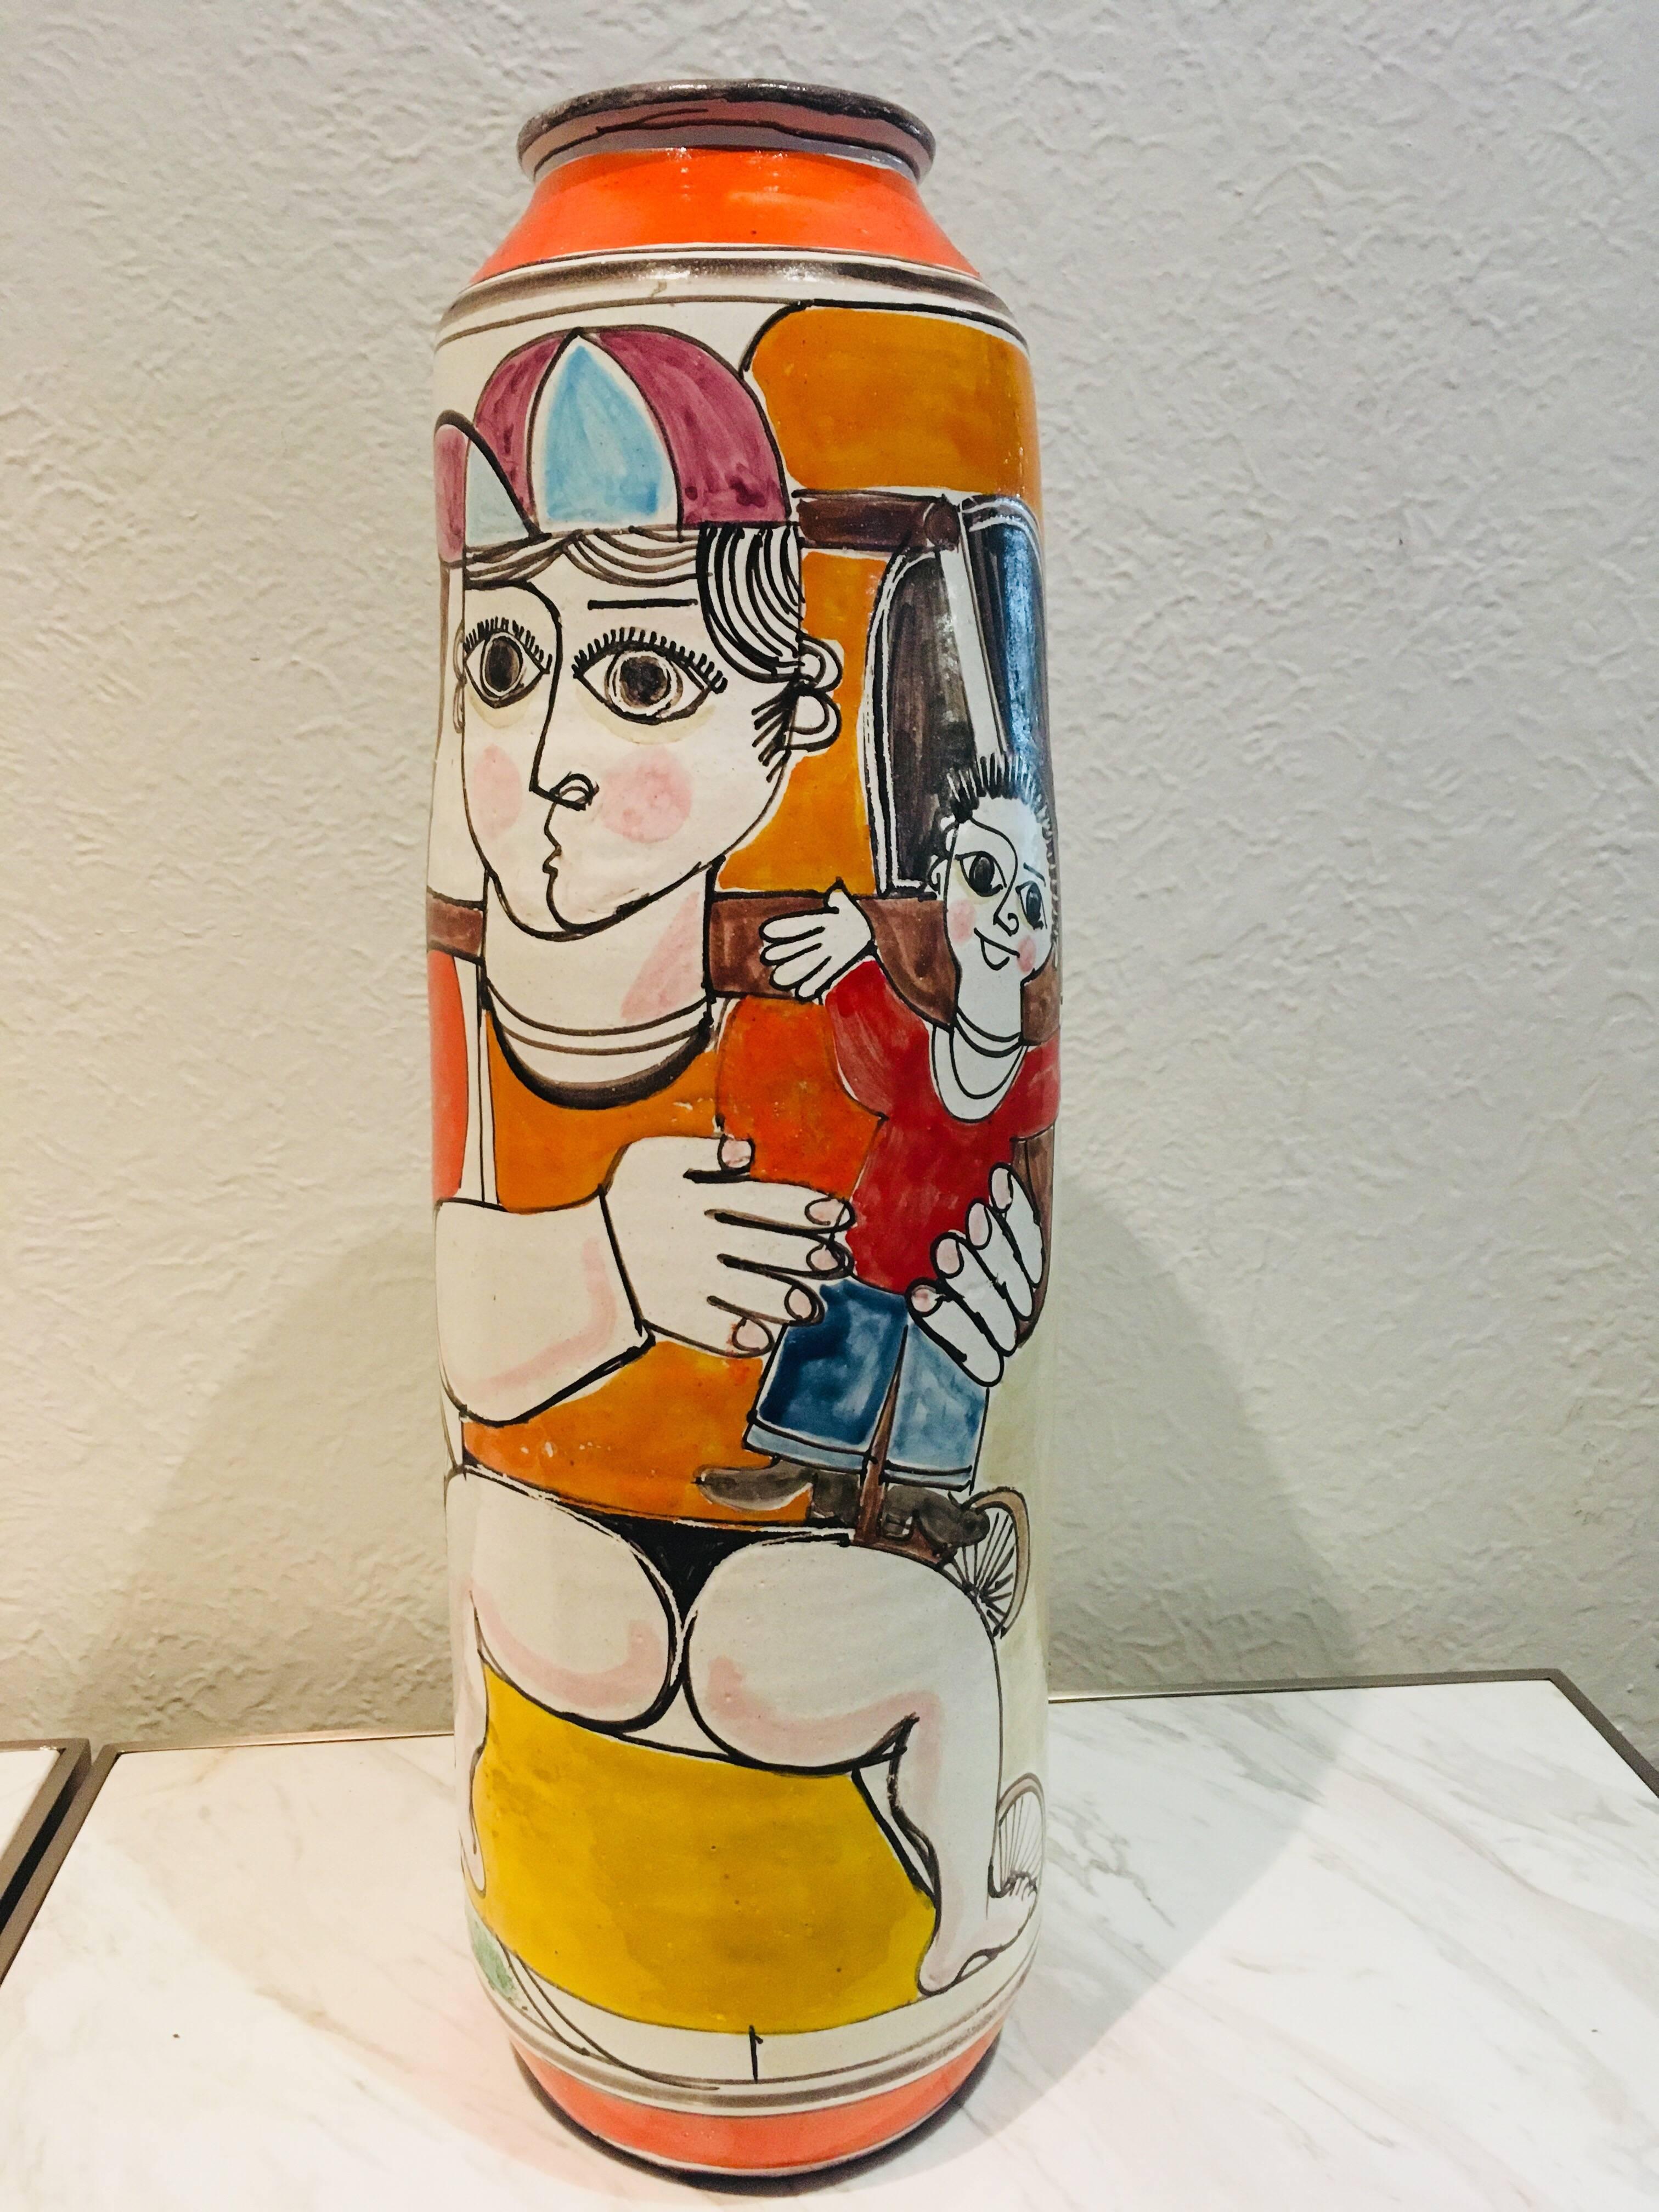 Exceptional example of this maker's work. Standing at 55 cm tall this is a truly monumental piece- a true piece of art by this highly regarded maker. Beautiful coloring and in excellent original condition.